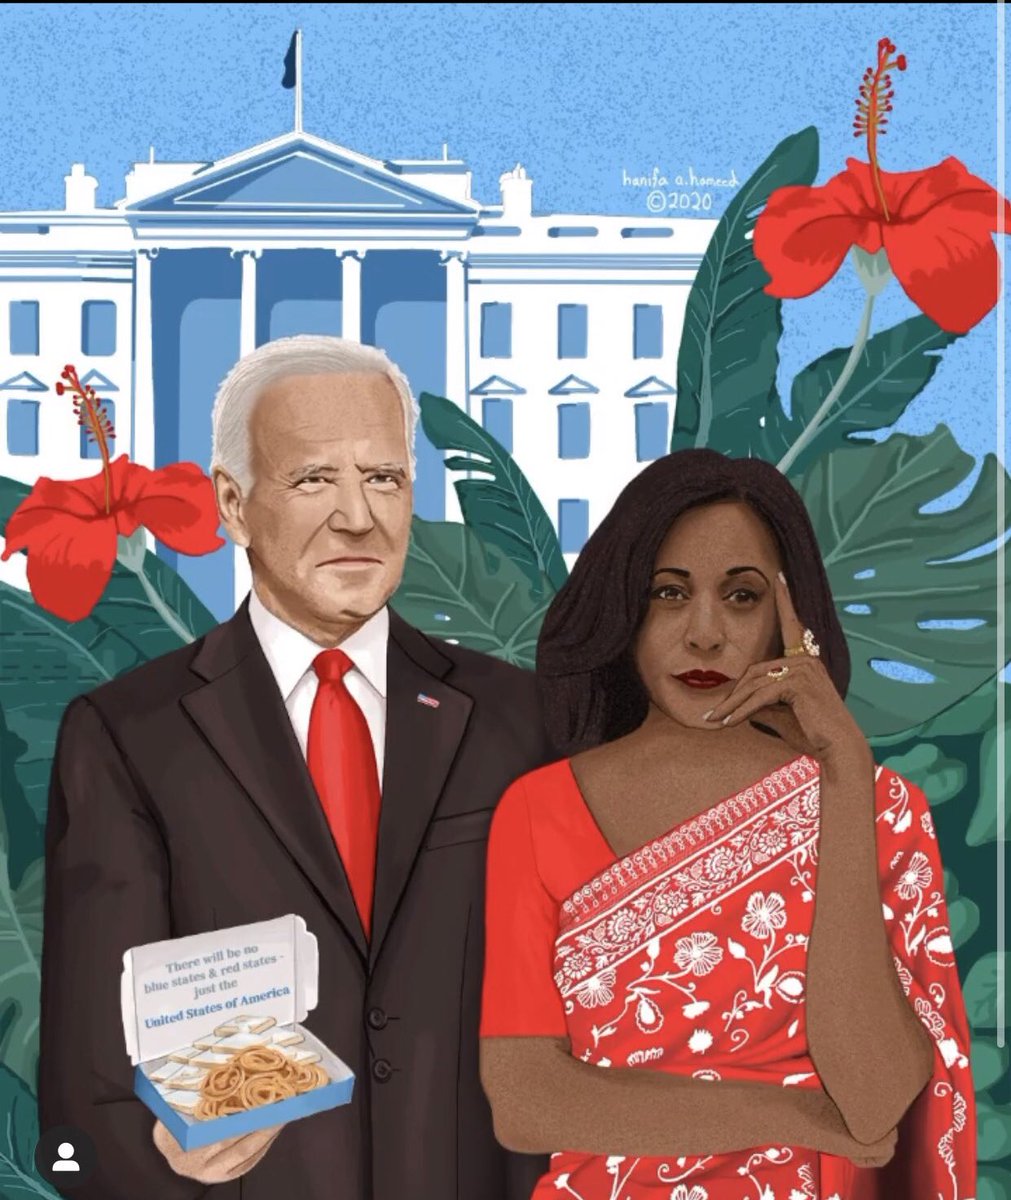 One thing that Kamala Harris’ ascension has revealed is how little there is of a South Asian/“Desi” American politic grounded in policy & vision. Instead, we get jokes about food, memes with her draped in a sari and how someone who “looks like us” is VP.